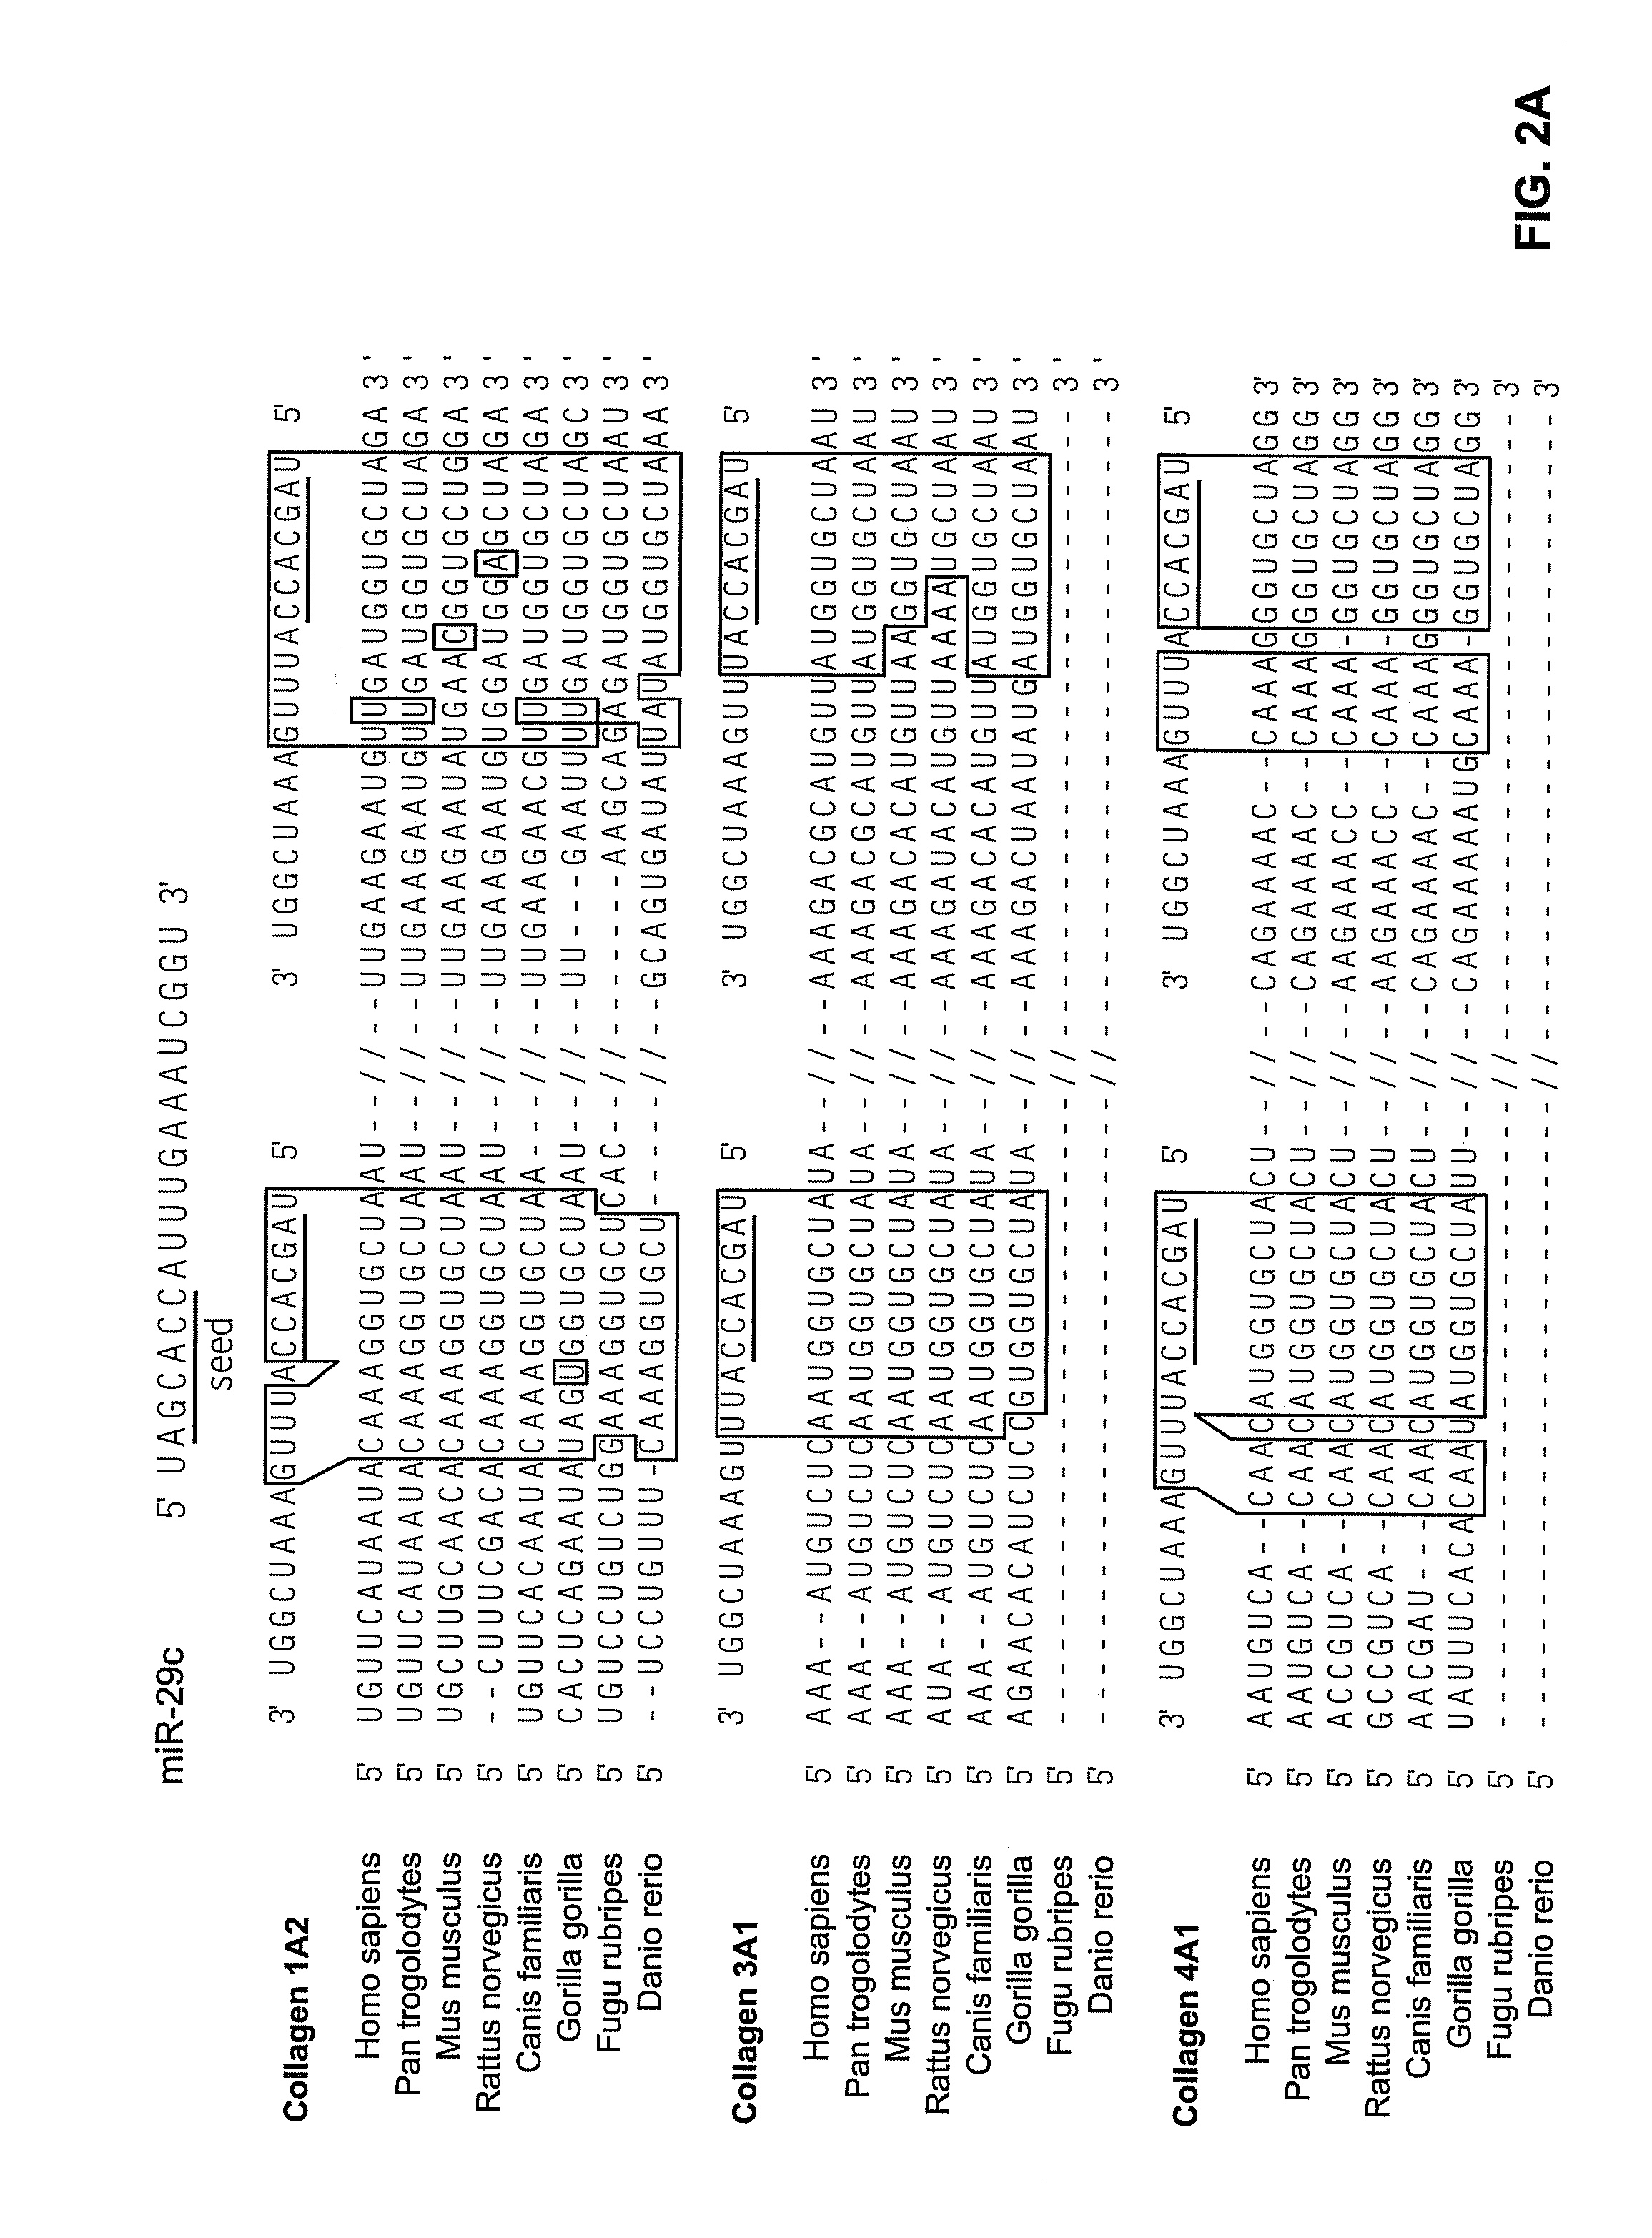 Reagents and Methods for miRNA Expression Analysis and Identification of Cancer Biomarkers